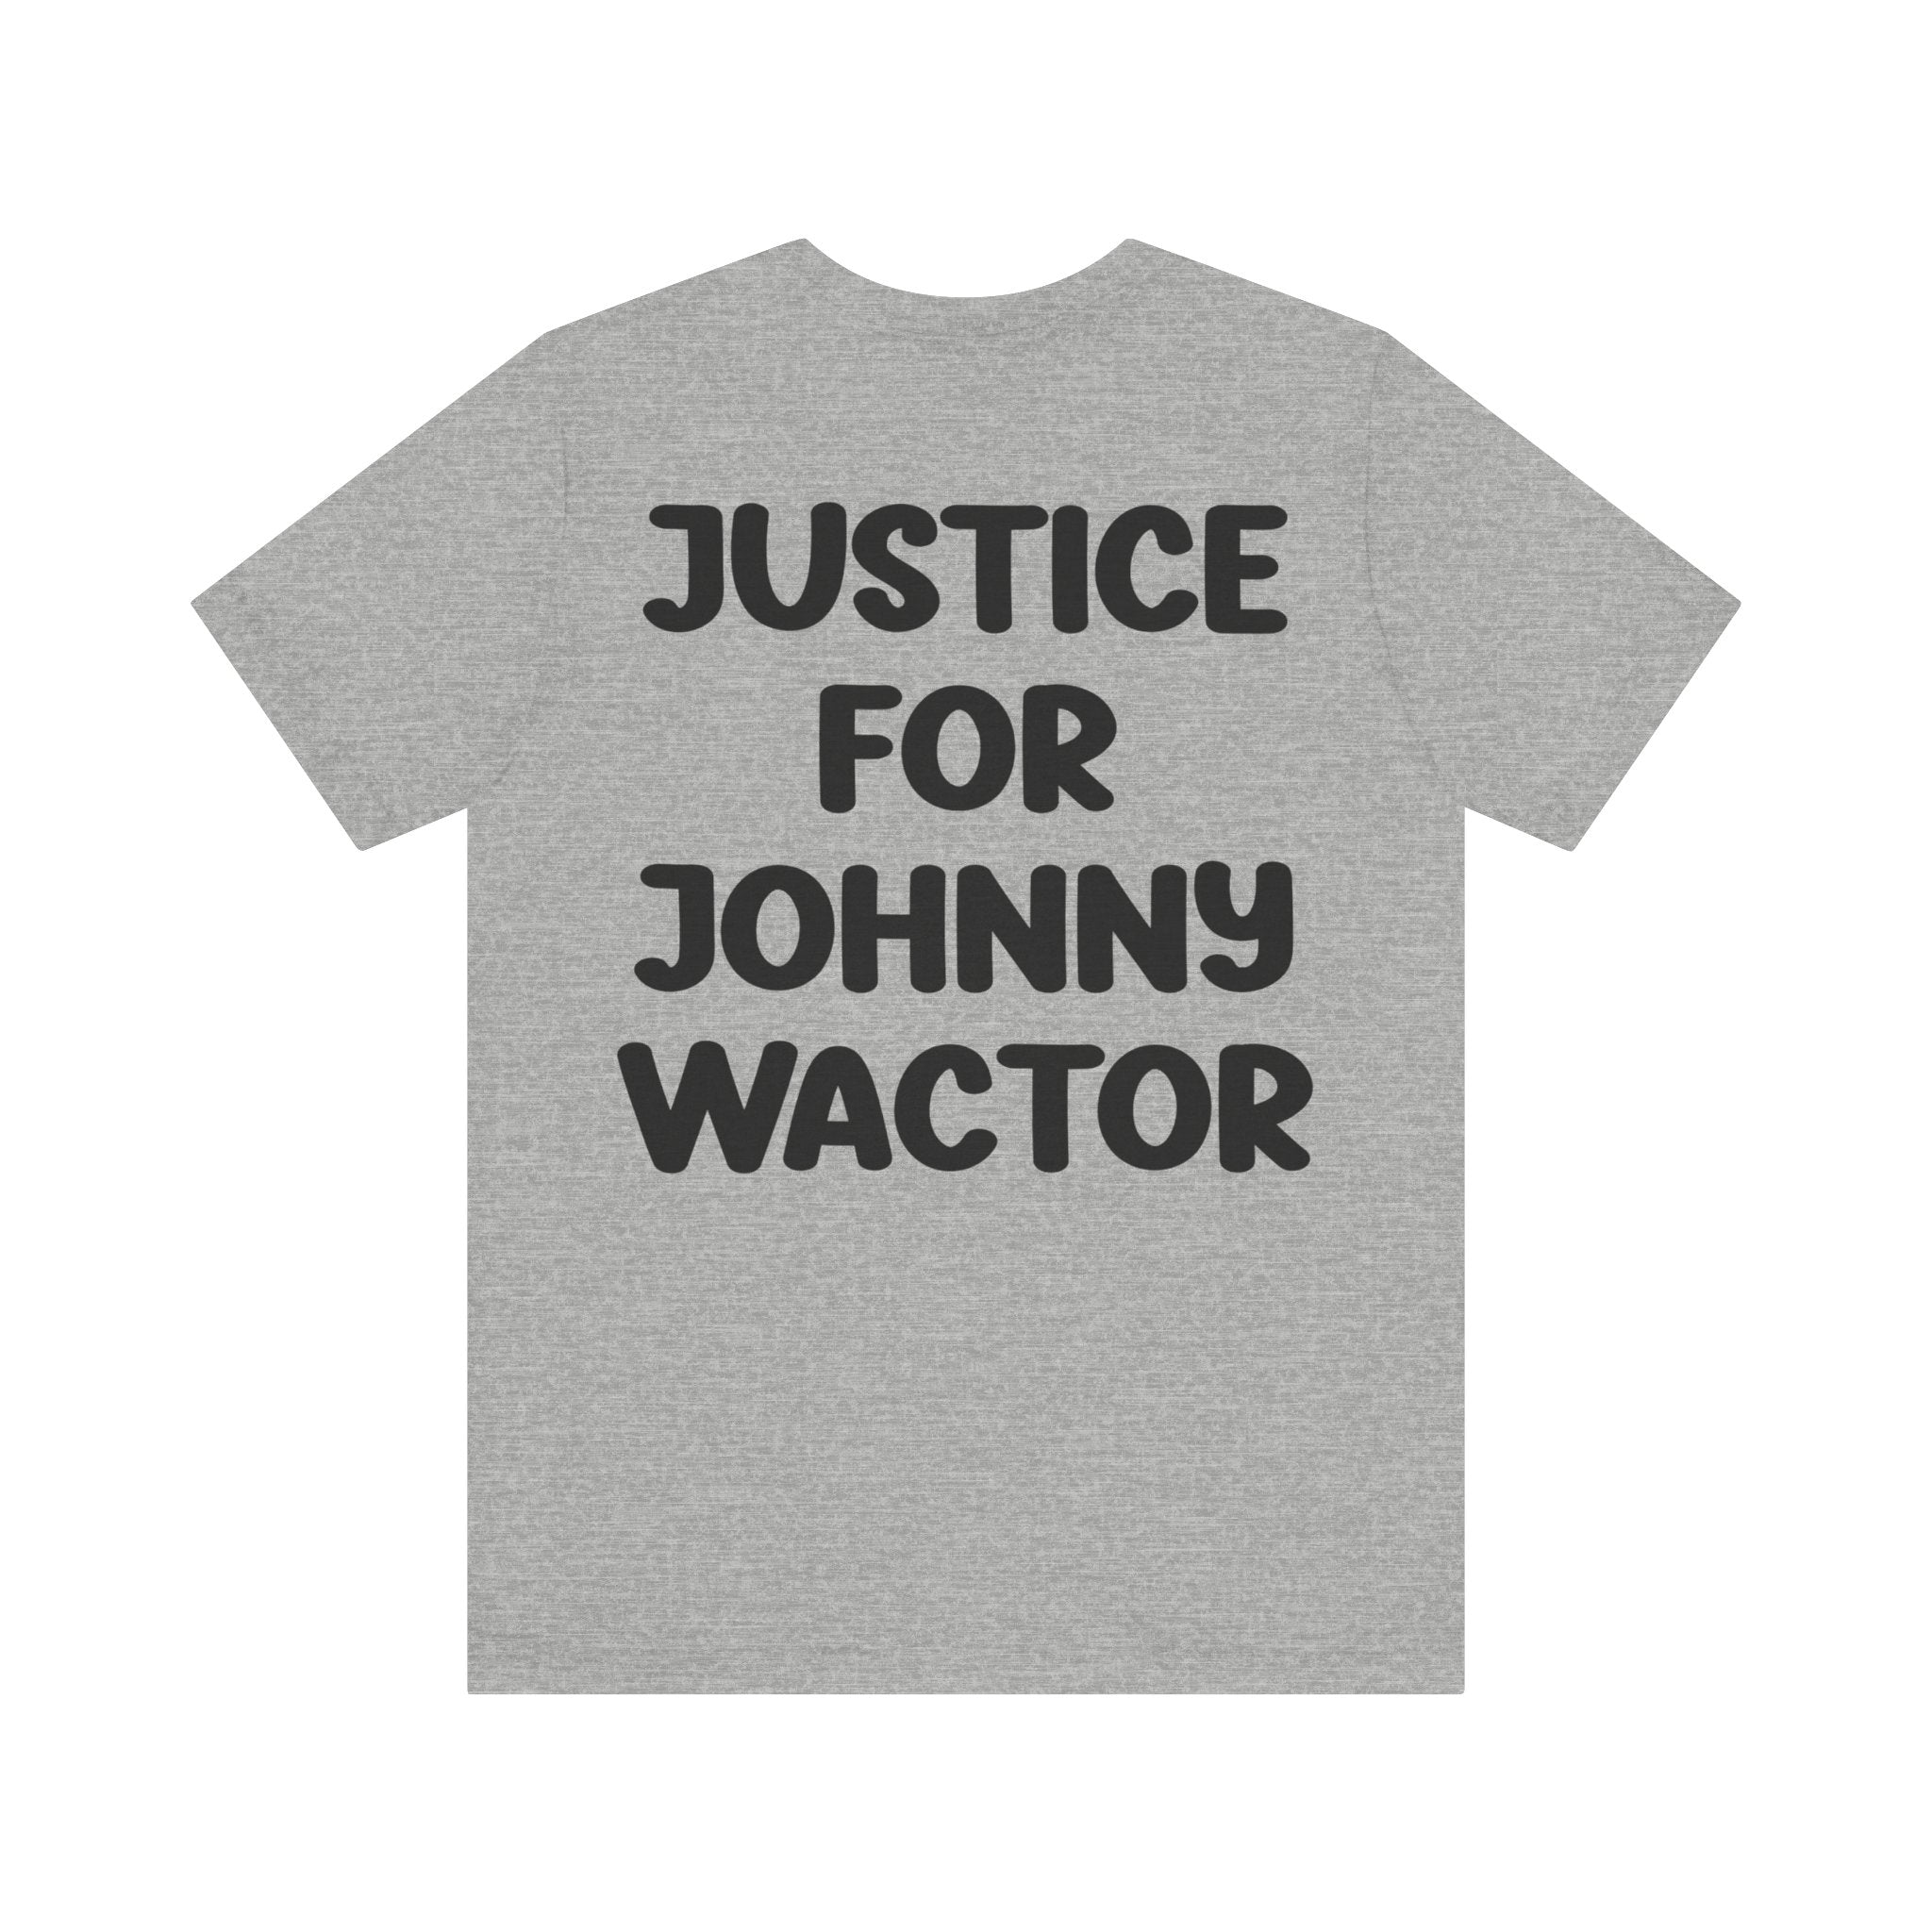 I Sink Therefore I swam Justice For Johnny Wactor Unisex Jersey Short Sleeve Tee